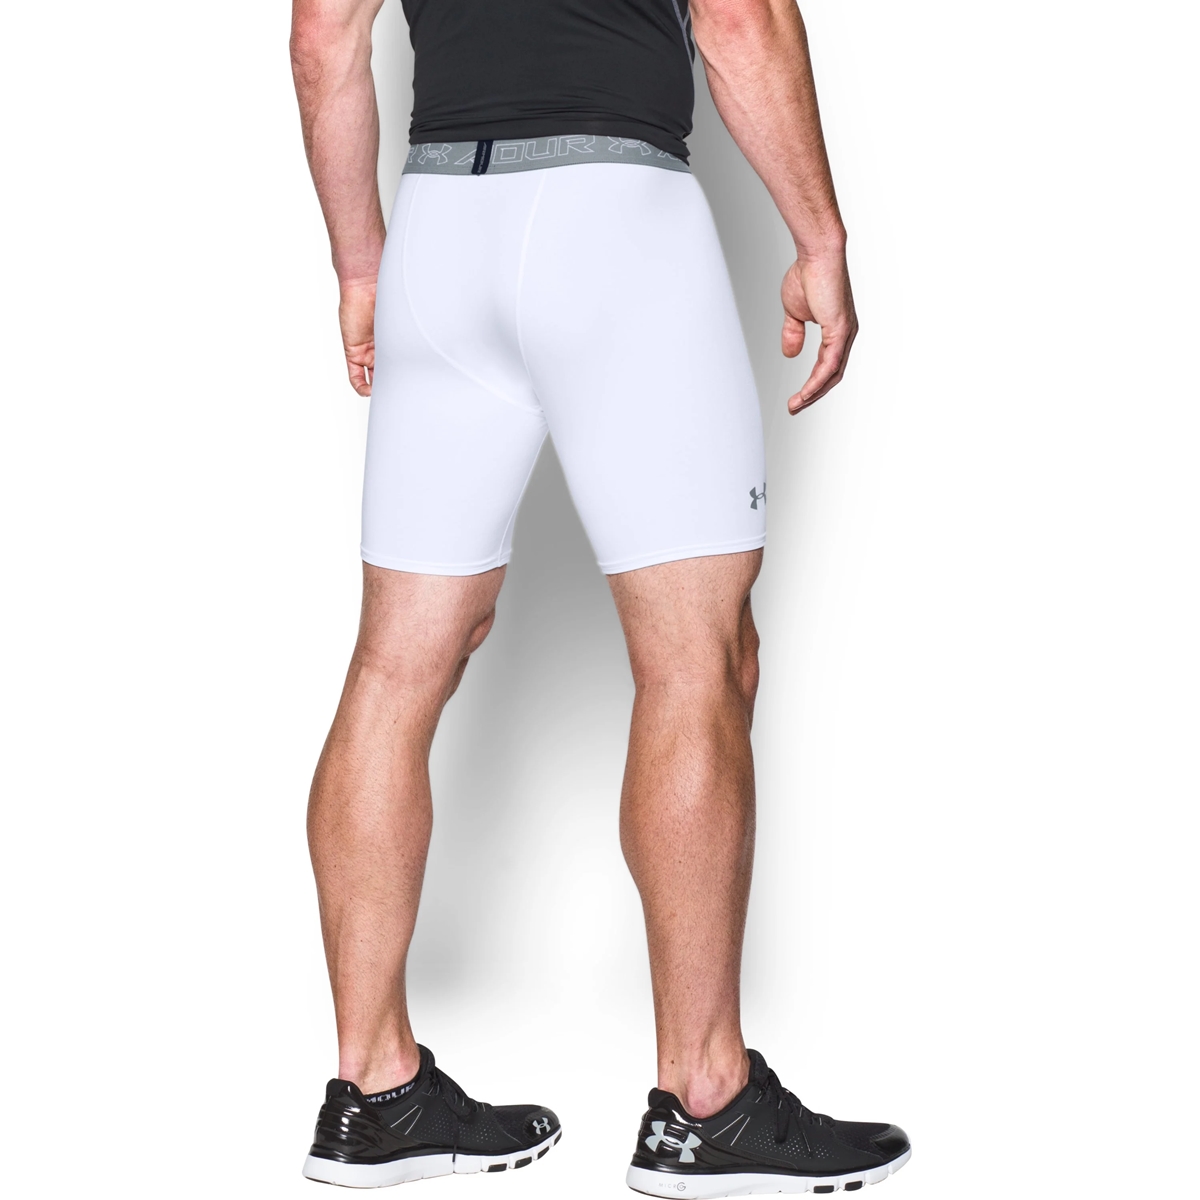 14 Unbelievable Men’s Compression Shorts With Cup Pocket For 2023